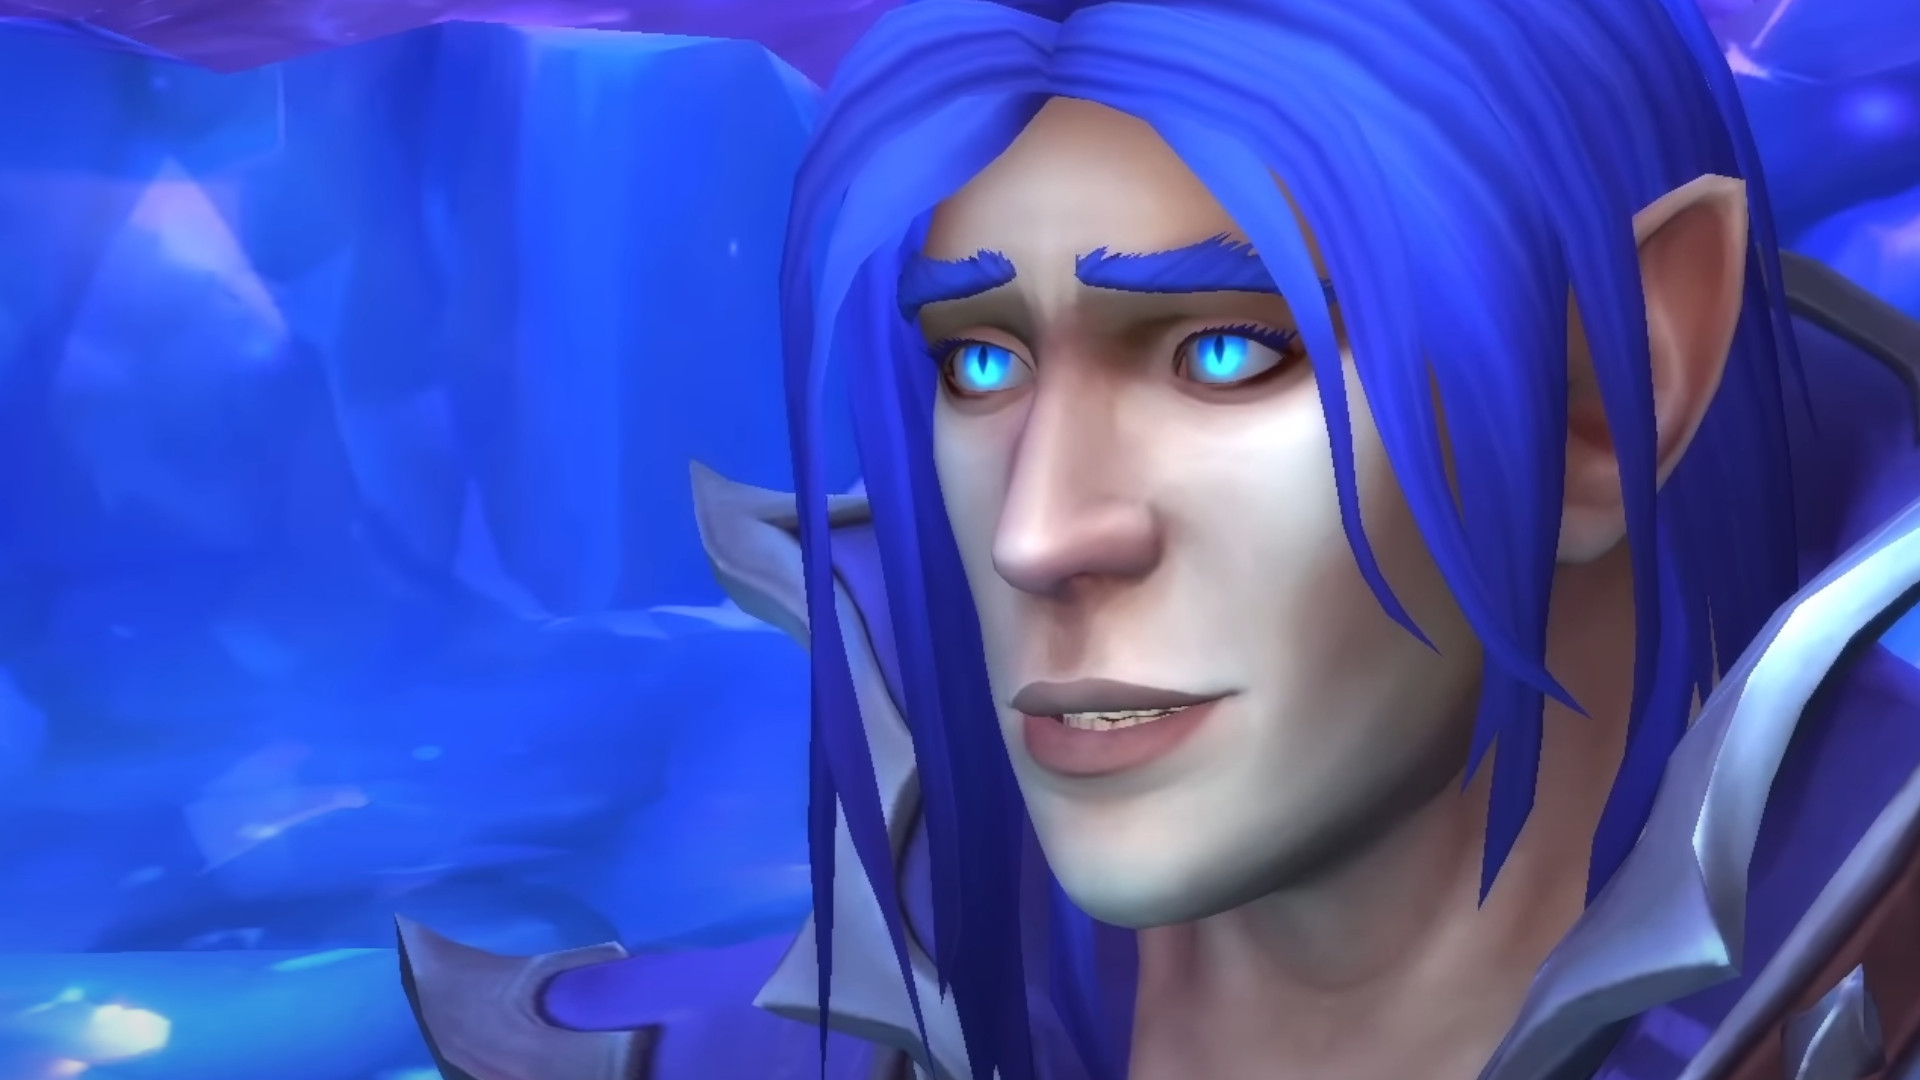  World of Warcraft player gets visited by benevolent twink 'Boostlord', a level 10 monster mage juiced up on funky dungeon scaling 